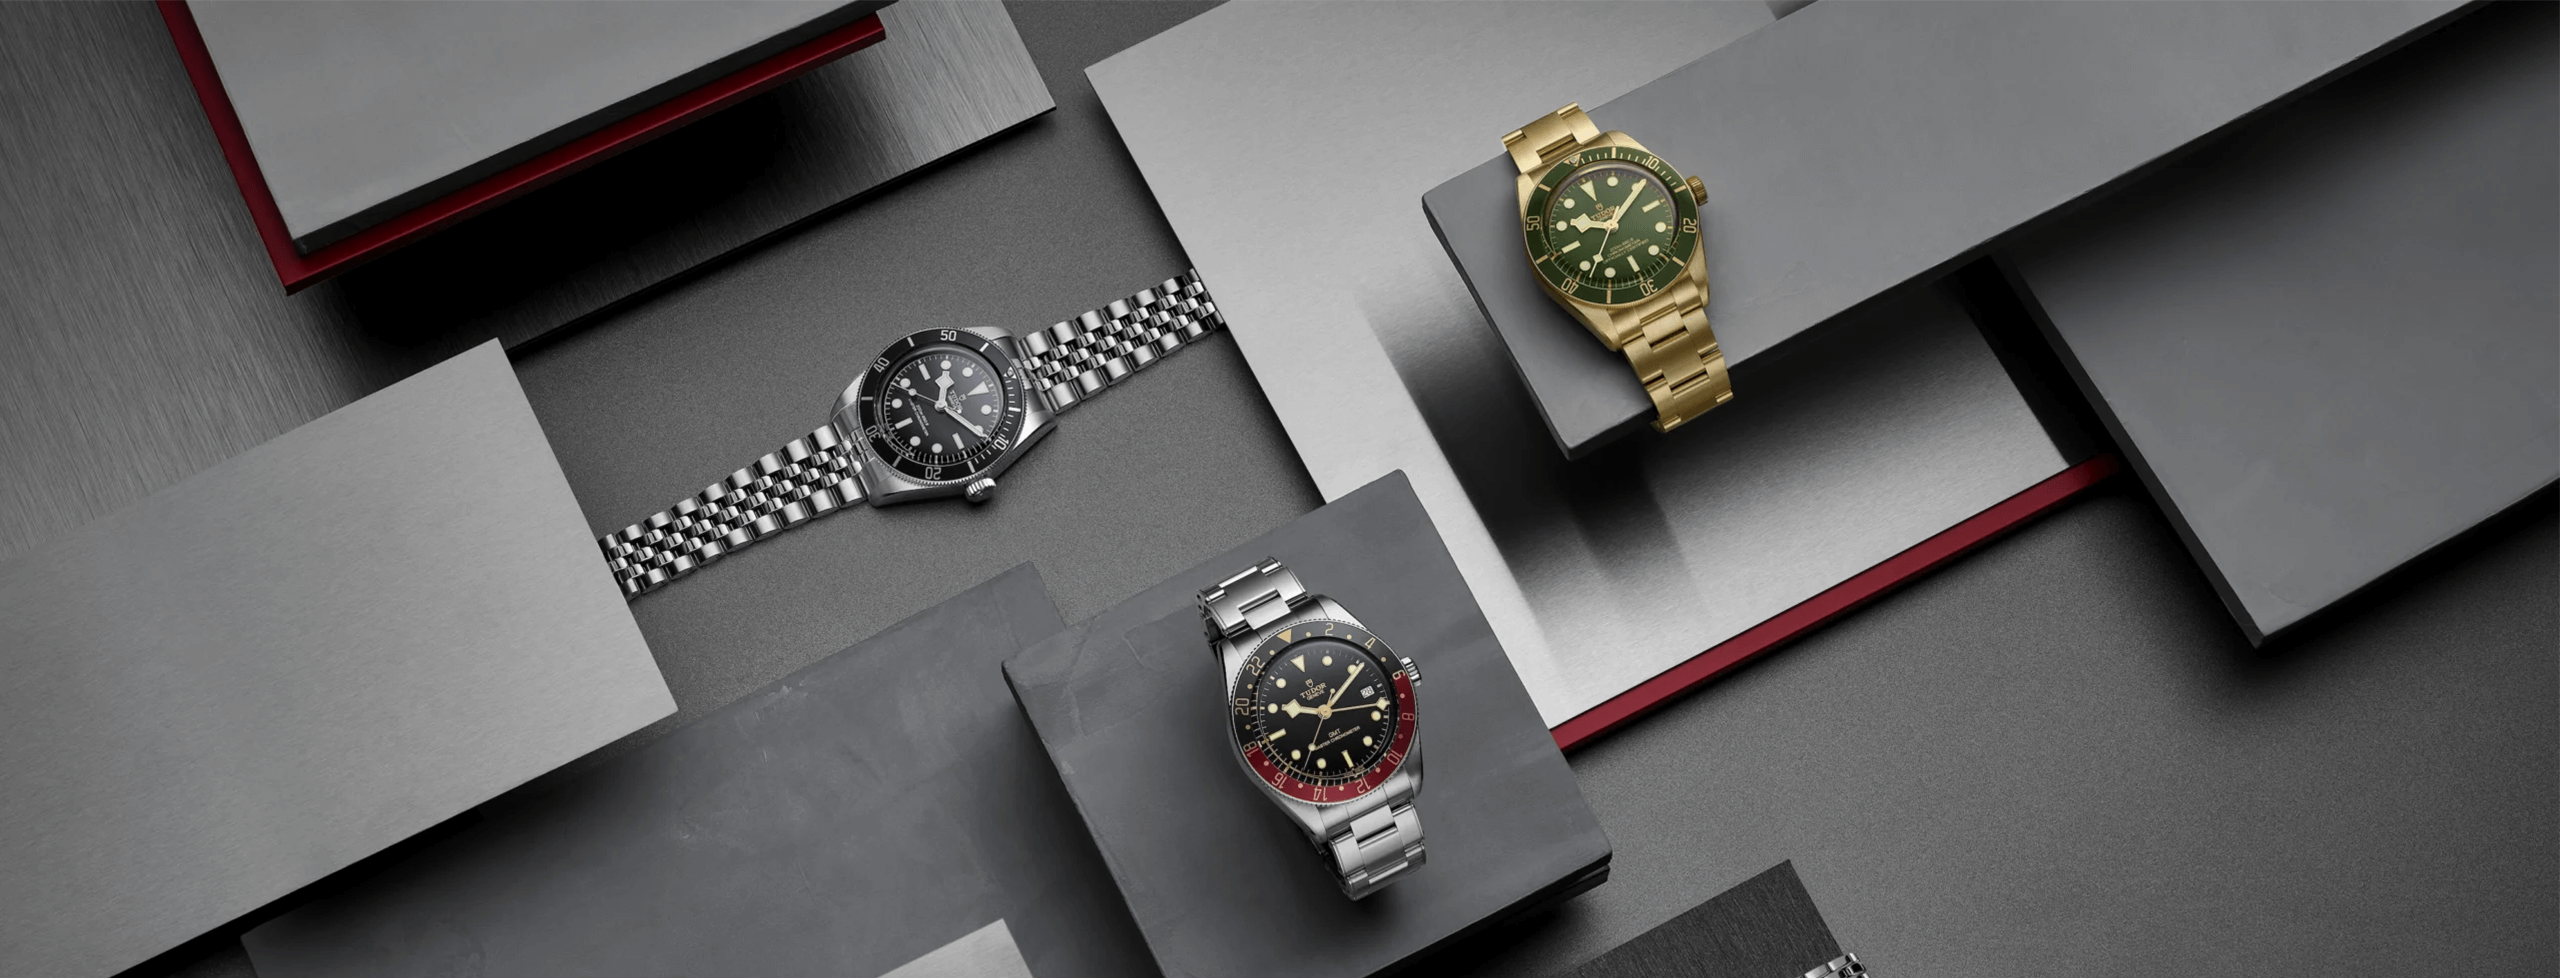 A display featuring three luxury wristwatches, with one silver-black, one gold-green, and one black-red, arranged on geometric grey platforms.